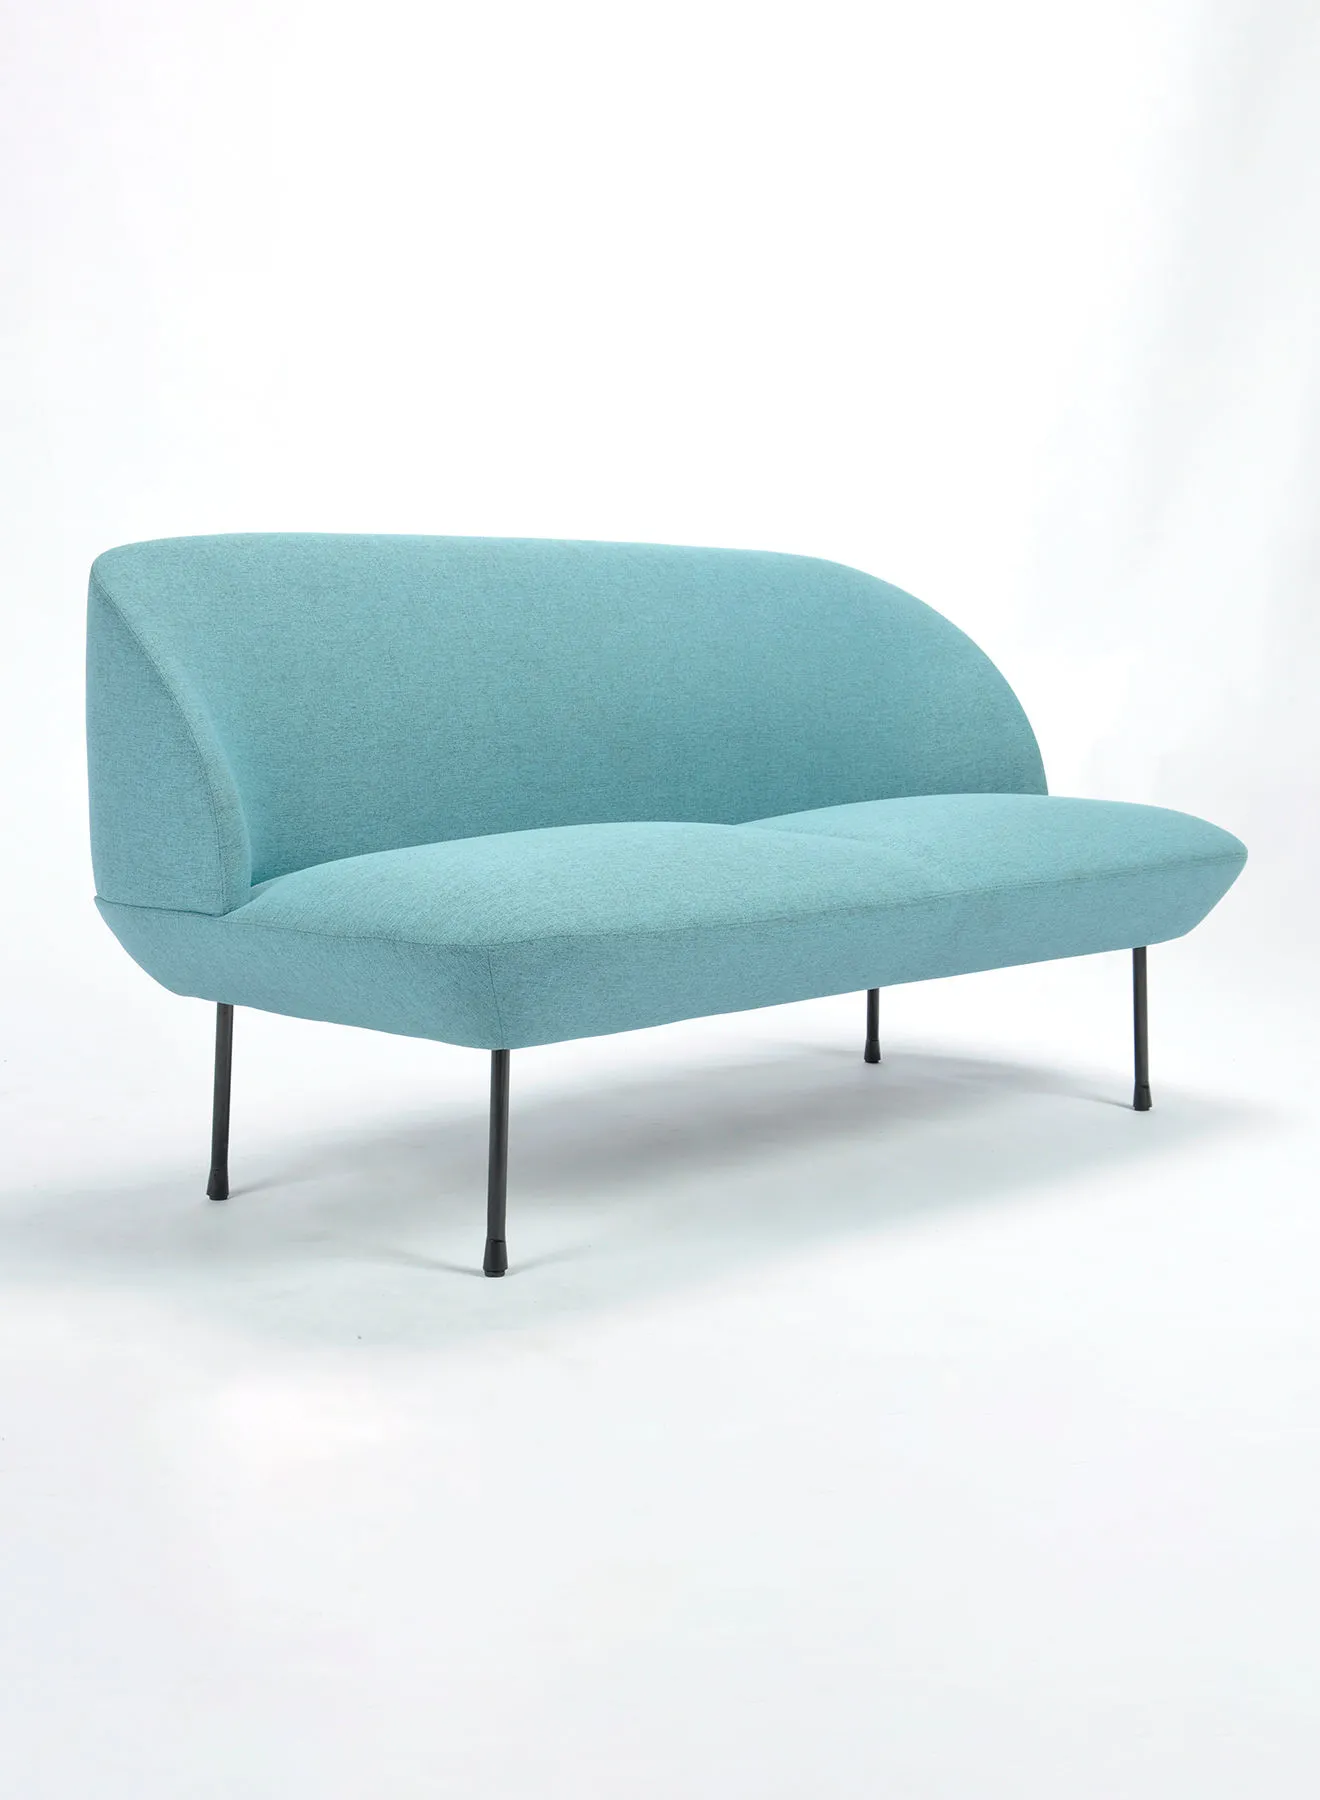 Switch Sofa - Upholstered Fabric Blue Couch - 152x72x76 cm - 2 Seater Sofa Relaxing Sofa